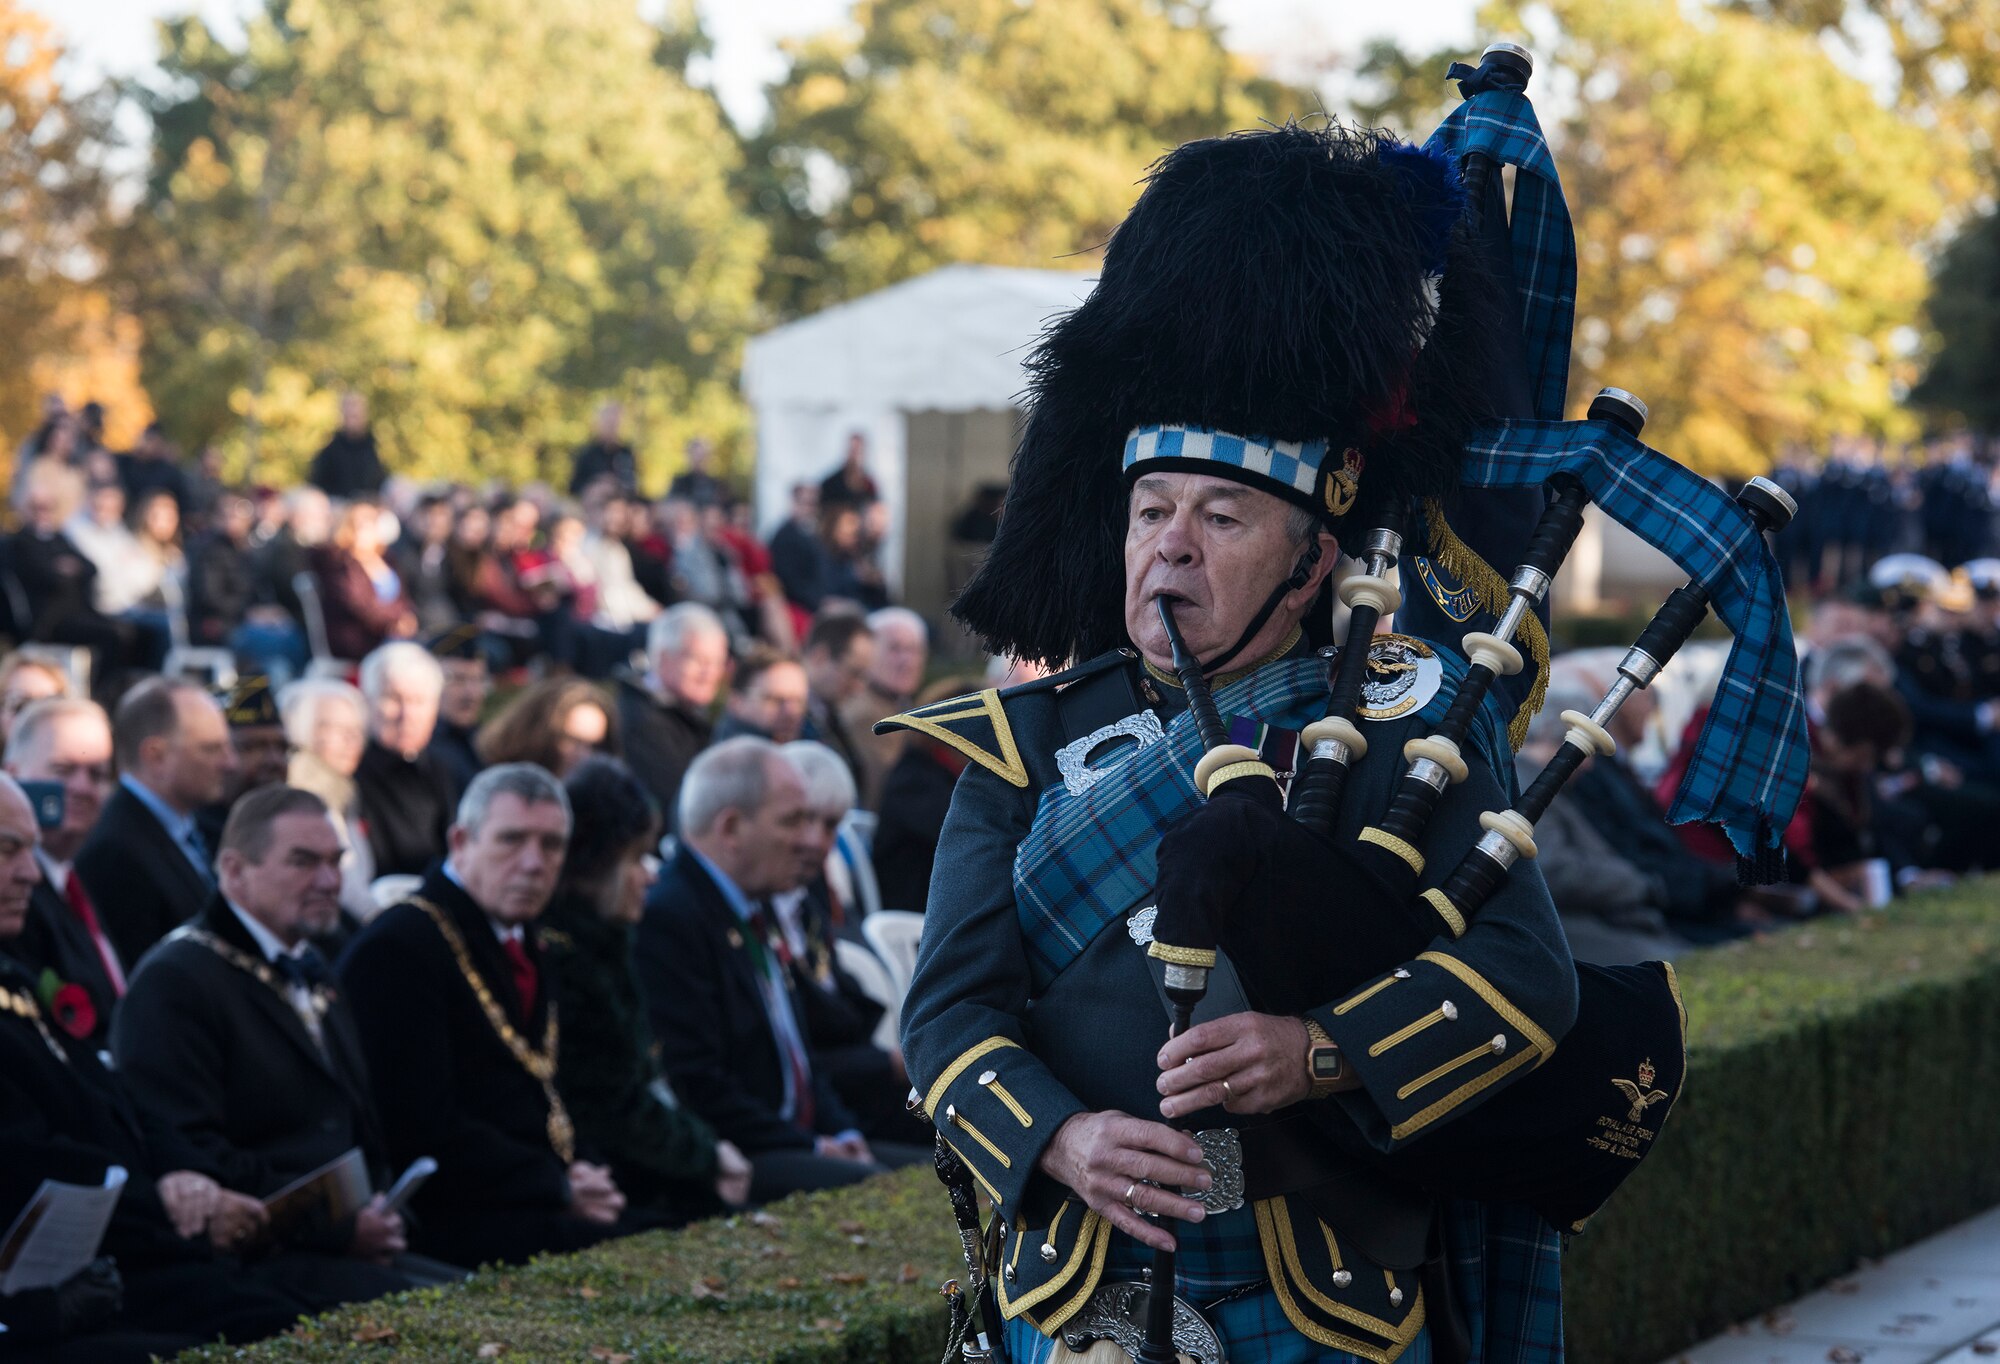 Royal Air Force Warrant Officer Gary Kernagham (Ret’d), performs Taps during a Veterans Day memorial event located at the Cambridge American Cemetery and Memorial, England on November 12, 2018. The ceremony marked 100 years since the first Armistice day on Nov. 11, 1918 when World War I came to an end. (U.S. Air Force photo by TSgt. Brian Kimball)